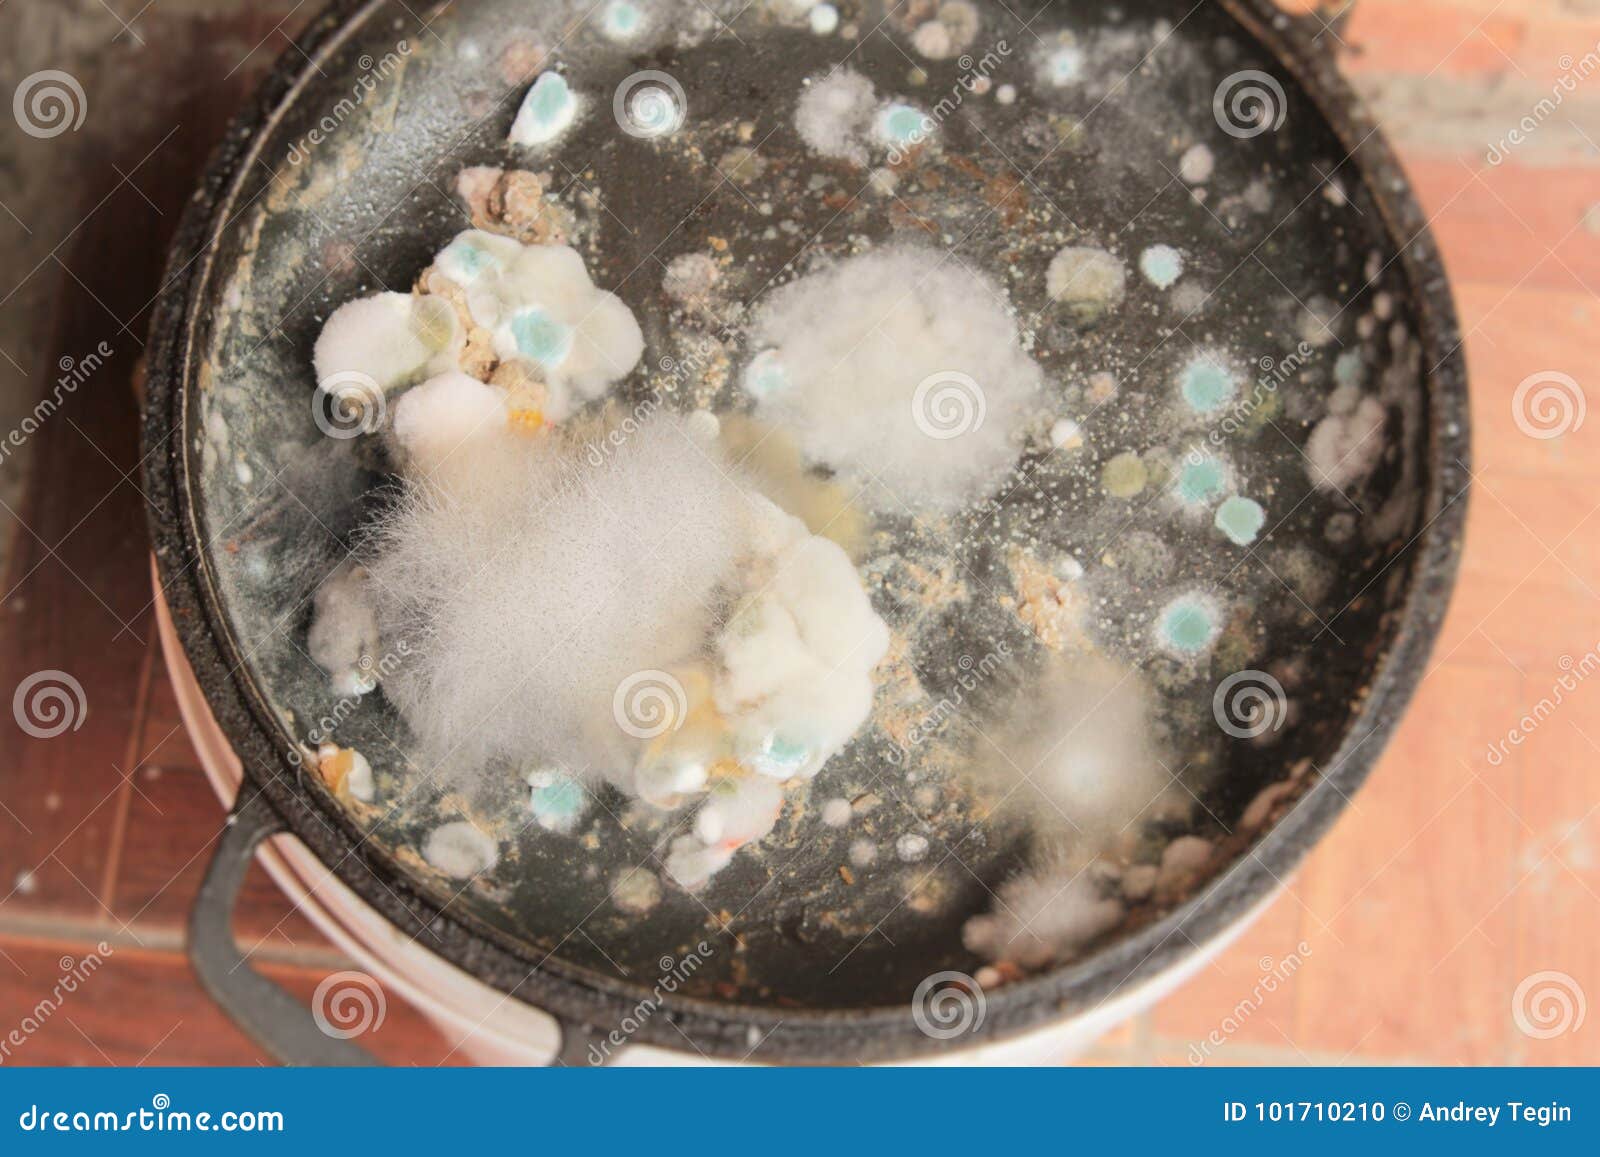 rotten and moldy food closeup